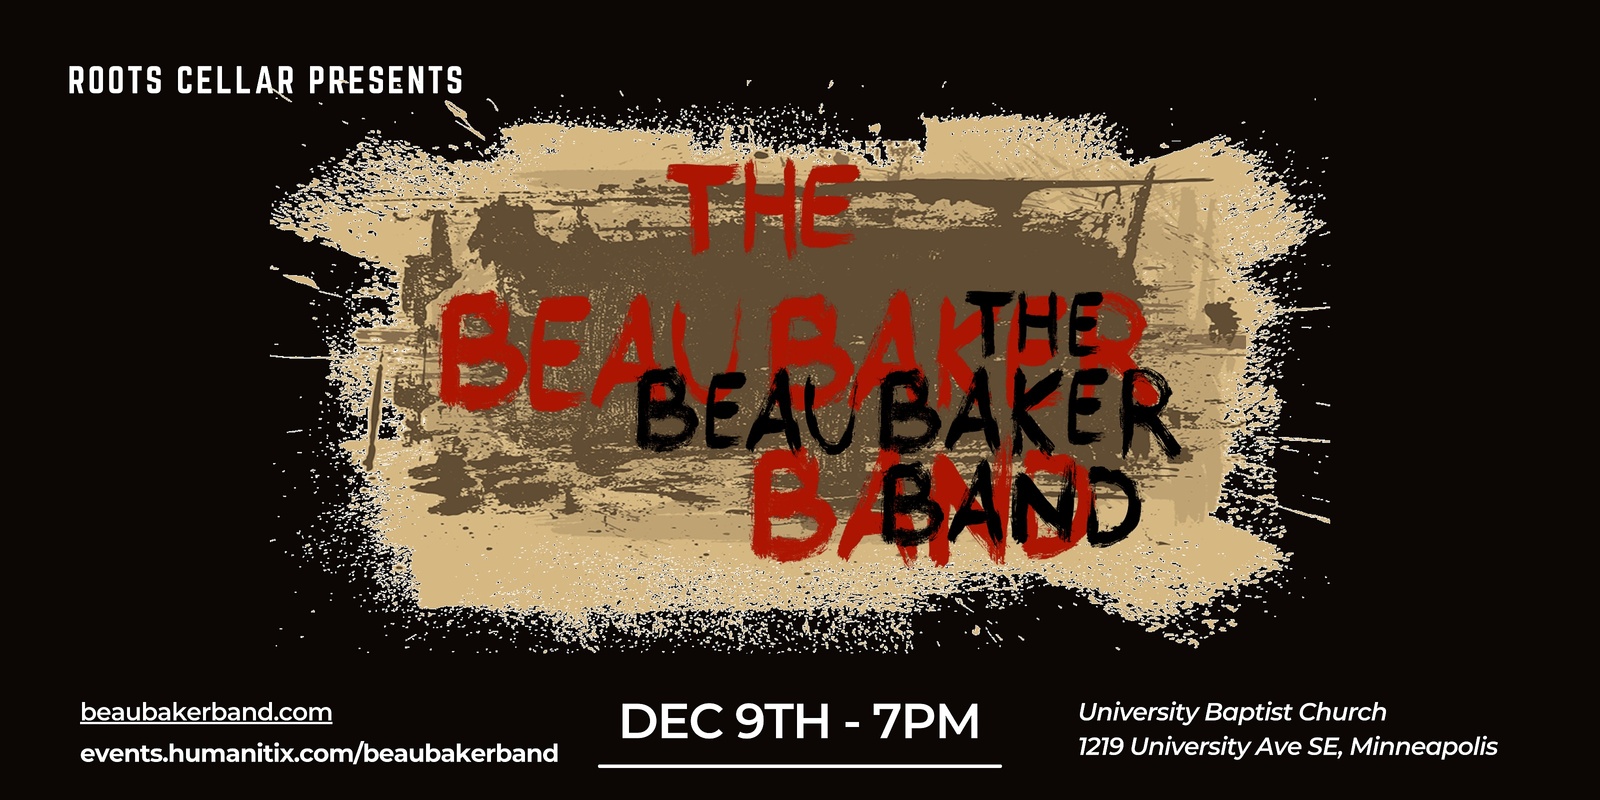 Banner image for Beau Baker Band - December 9th at 7pm at the Roots Cellar